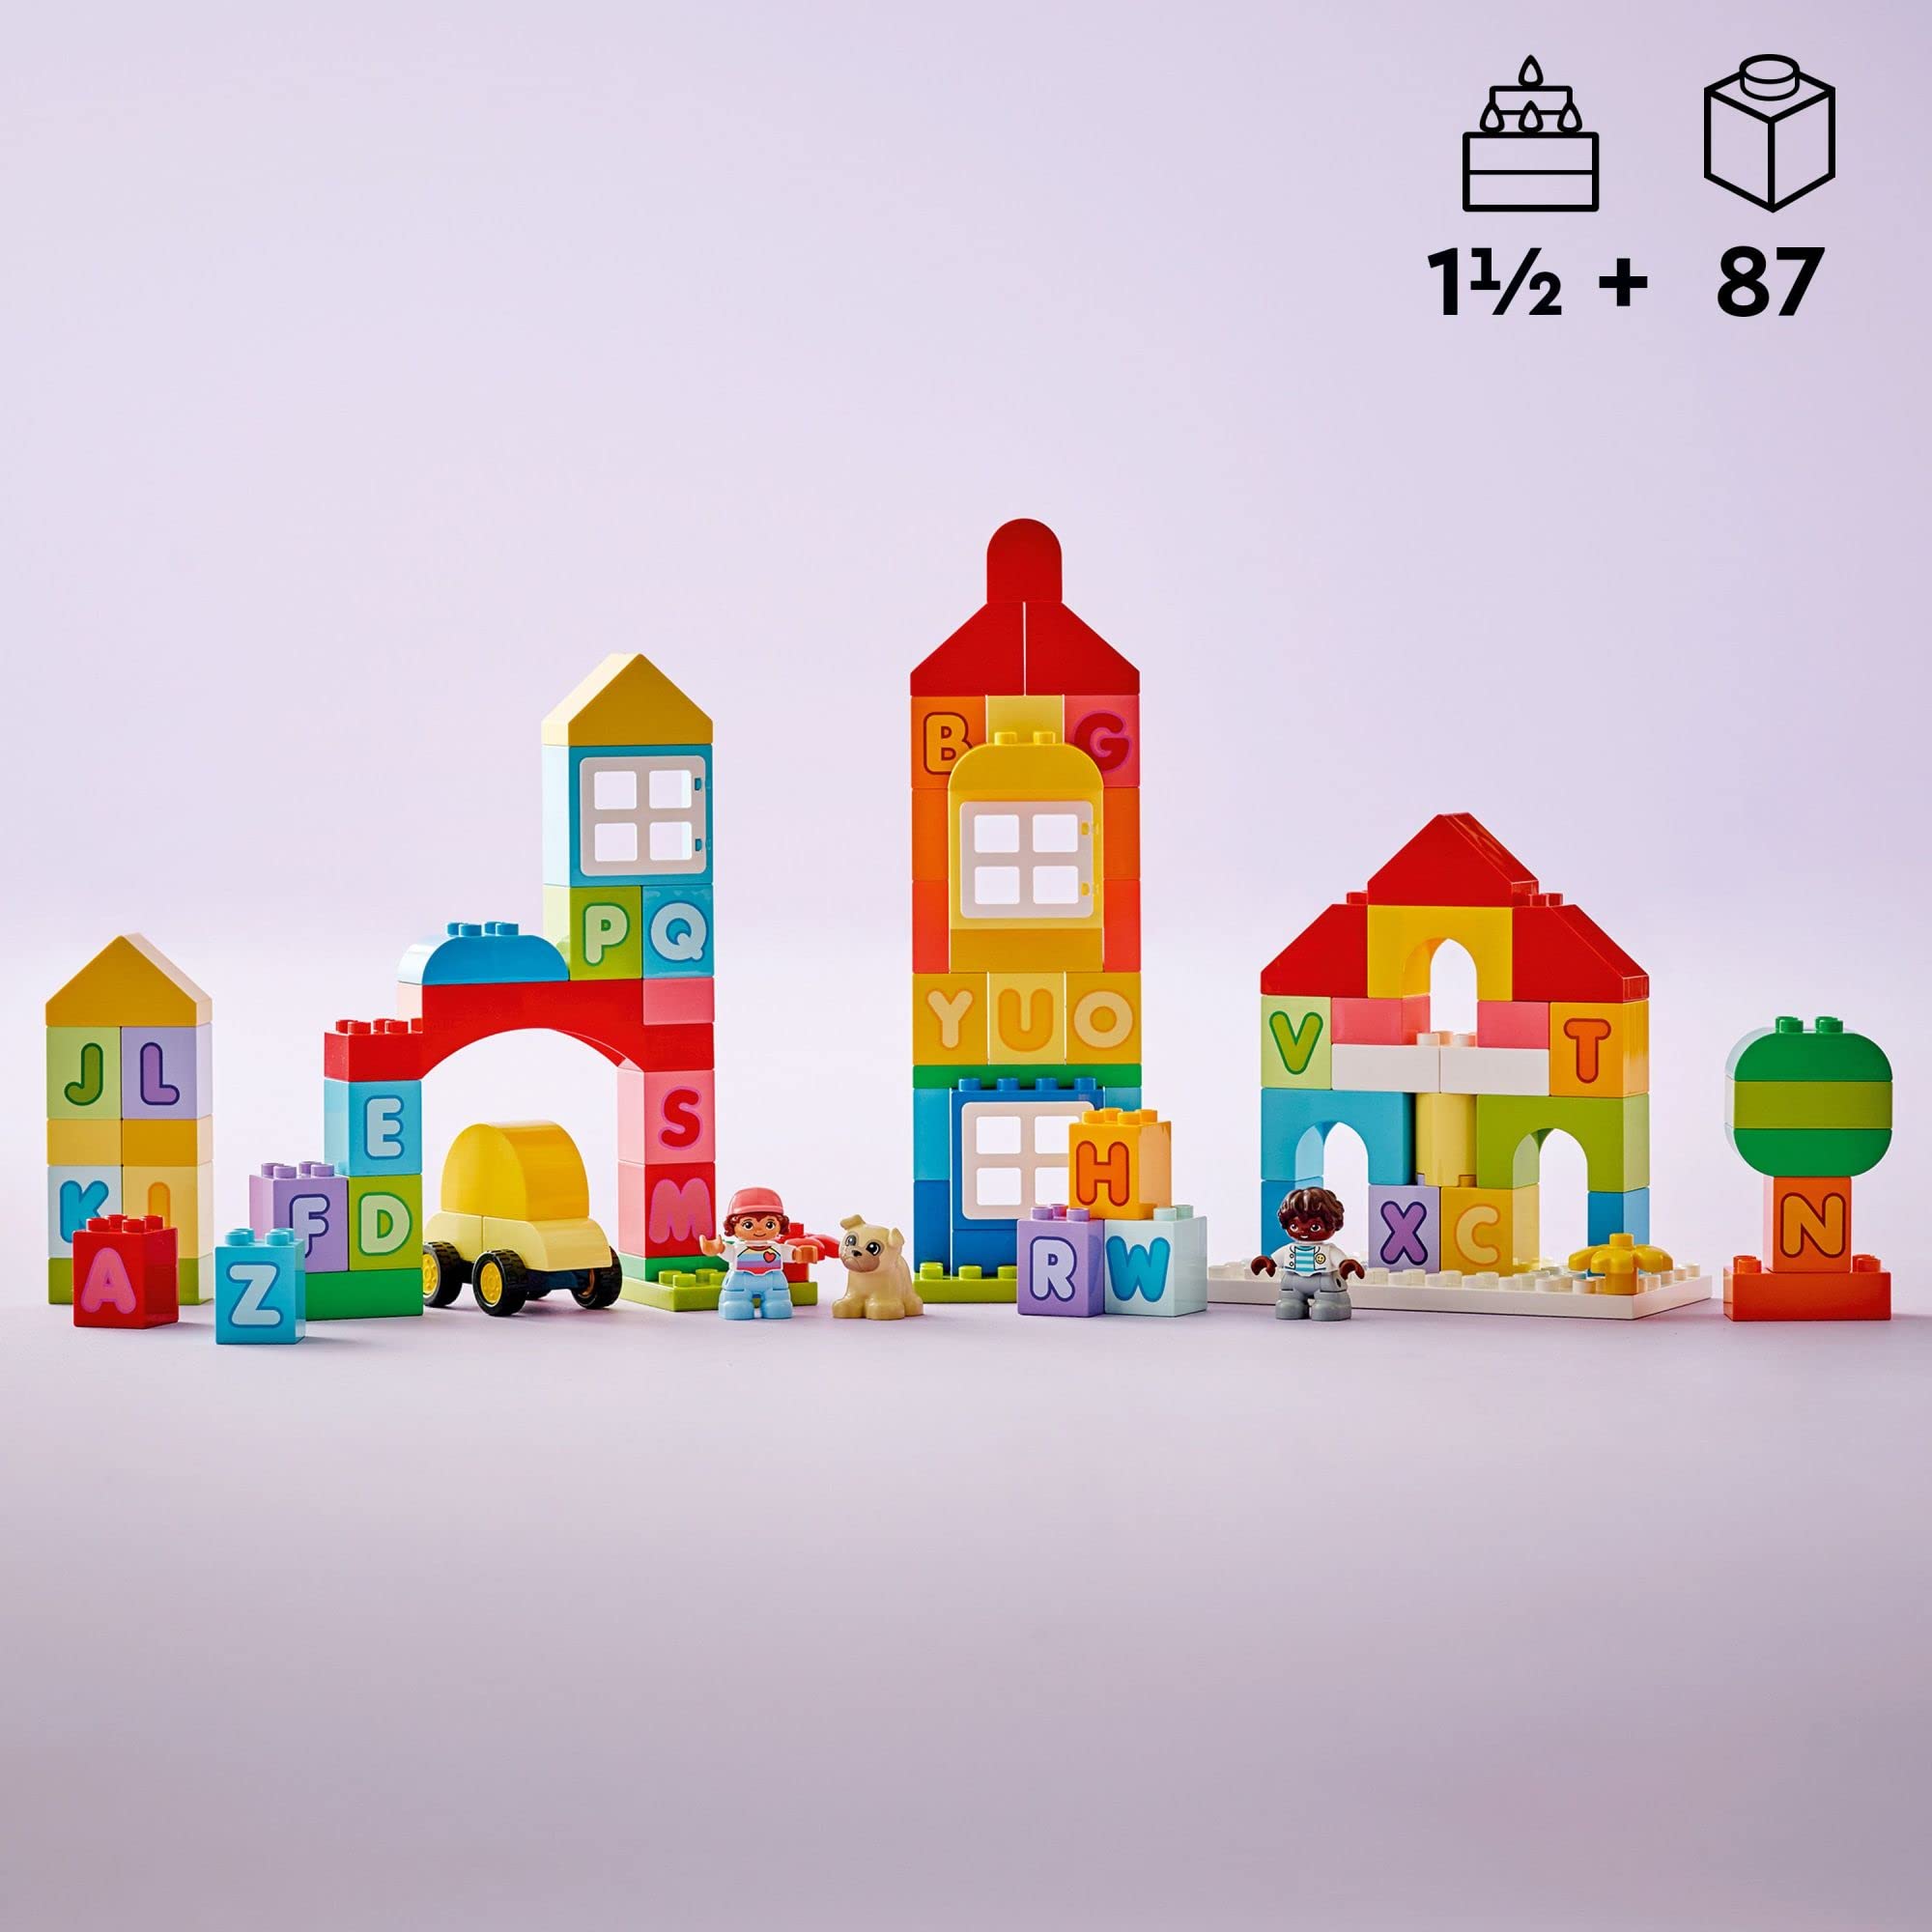 LEGO DUPLO Classic Alphabet Town 10935, Educational Early Learning Toys for Babies & Toddlers, Learn Colors, Letters and Shapes with Large Bricks, Interactive Building Toy for Preschool Kids